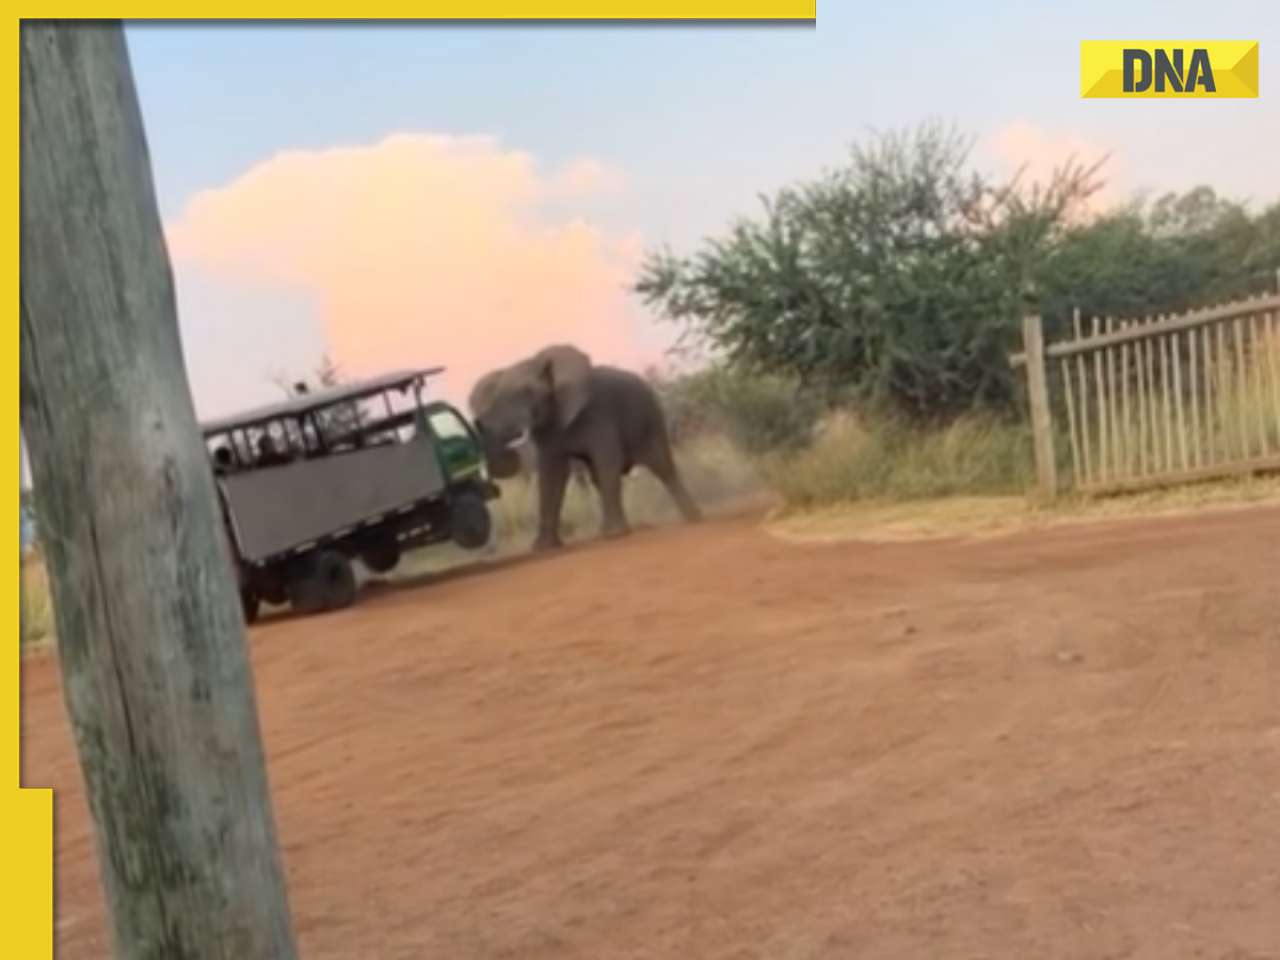 Elephant nearly tips over safari vehicle packed with tourists in viral video, internet is shocked